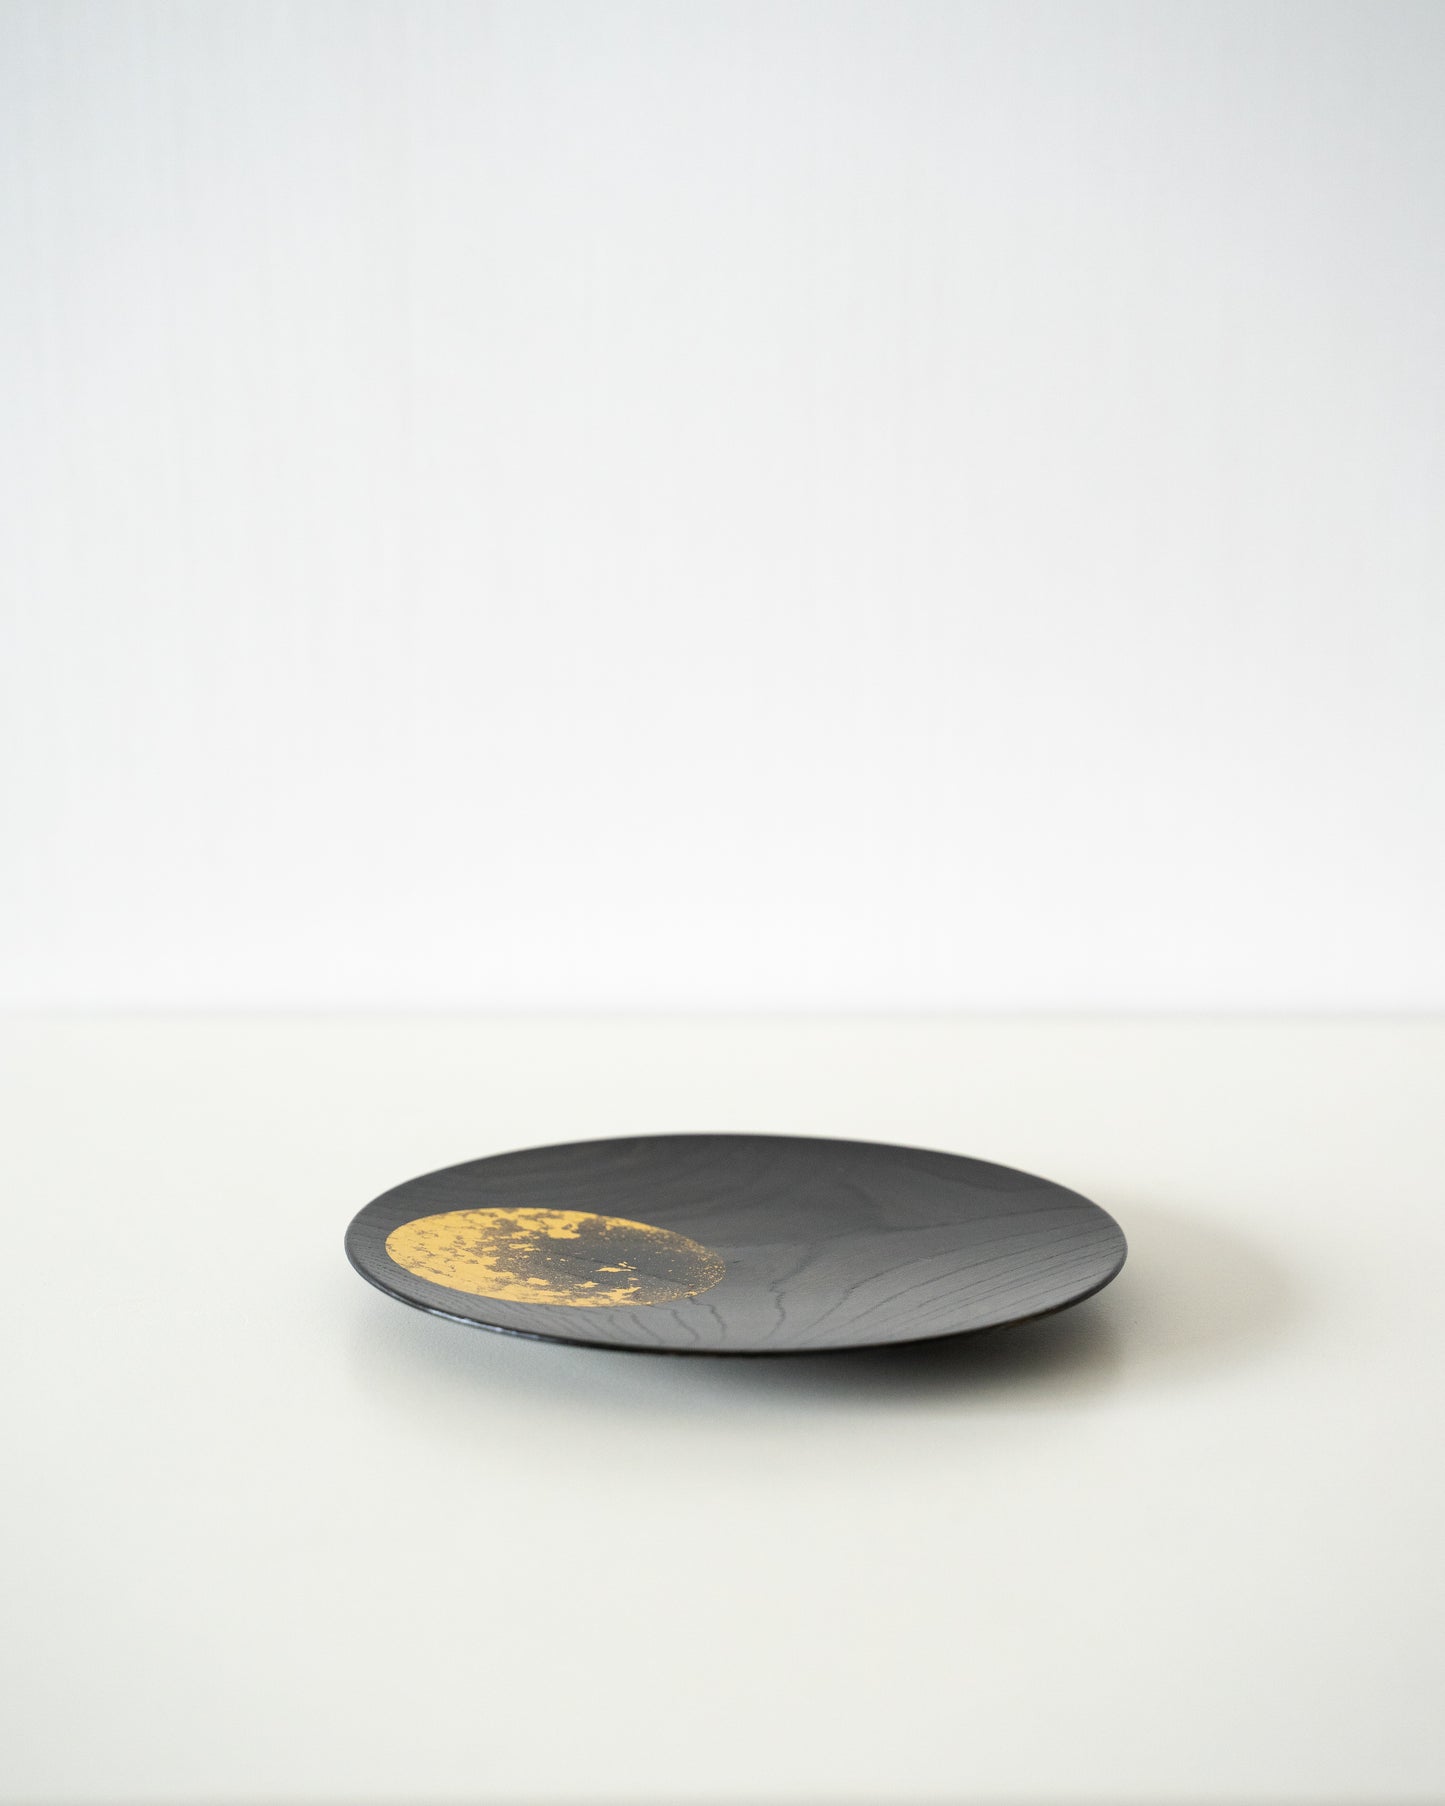 Hazy Moon - Gold Leaf Lacquerware Plate